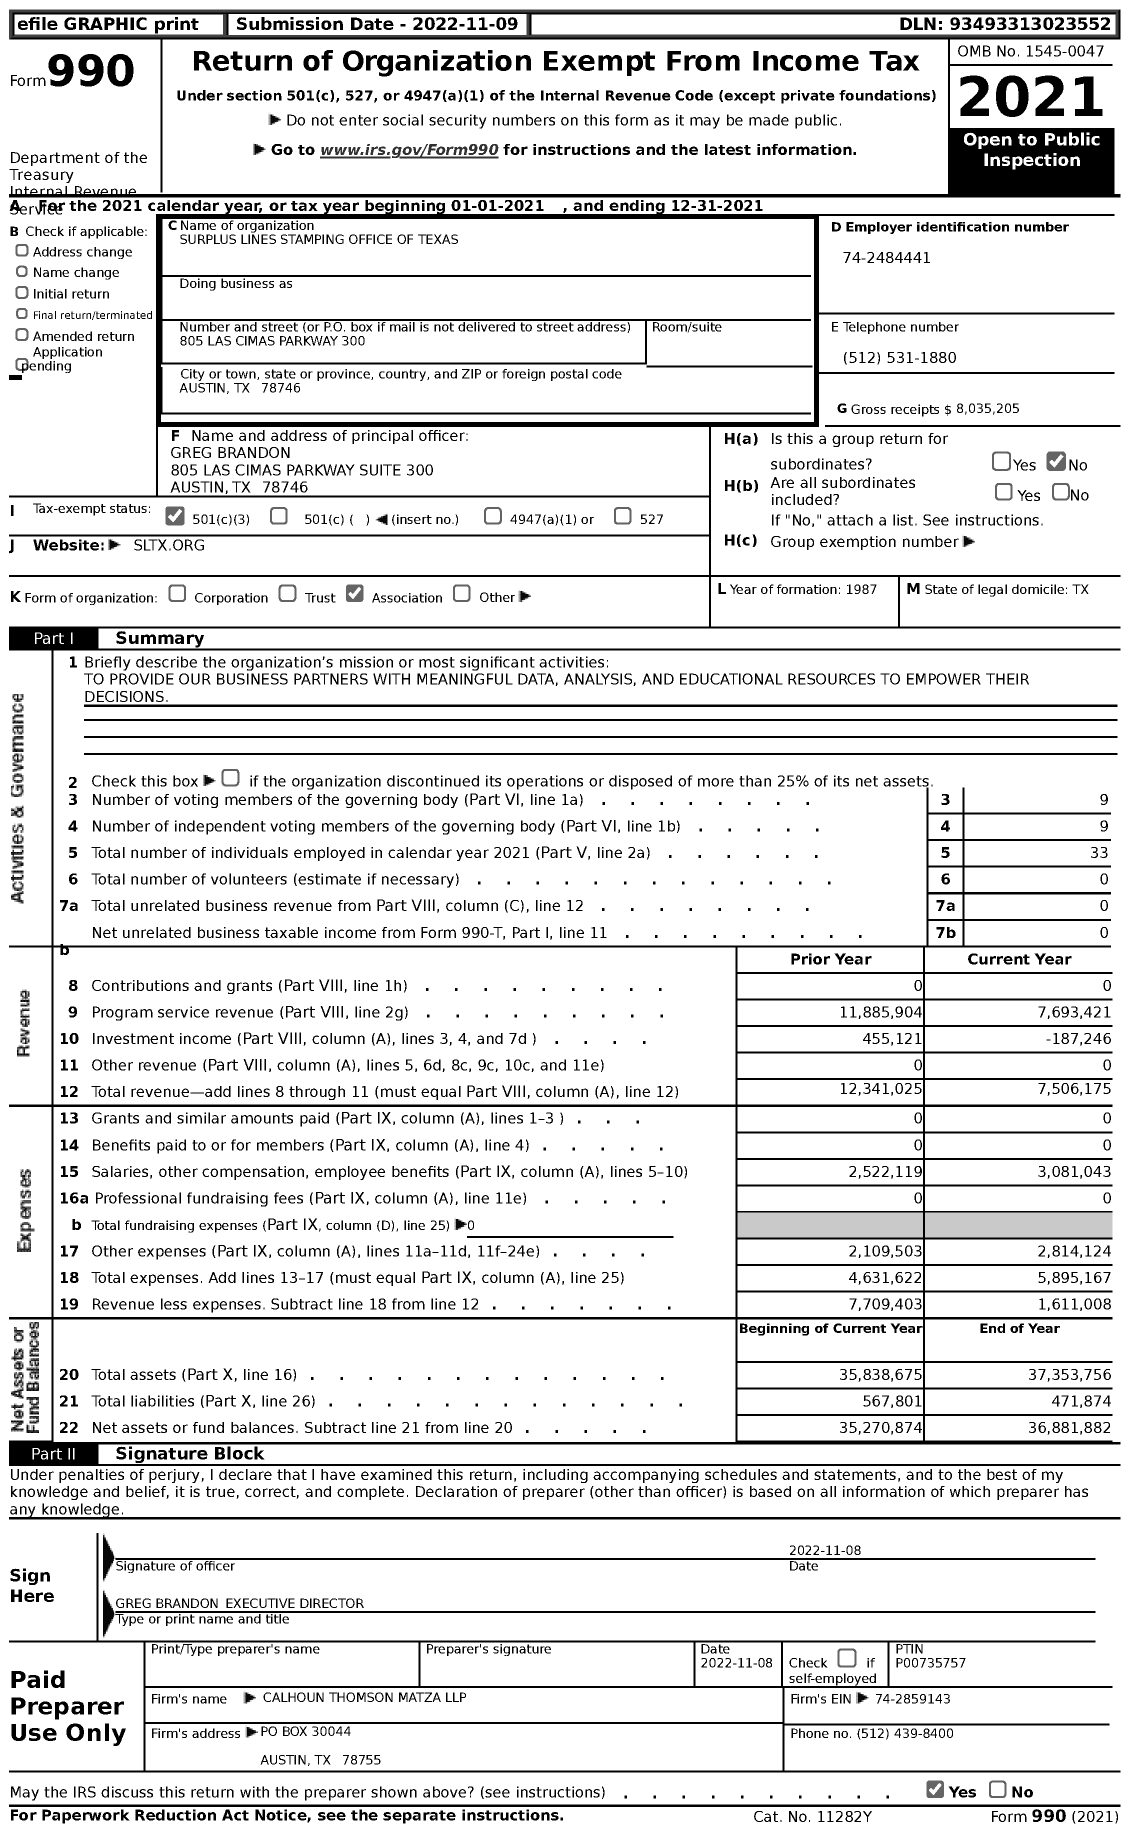 Image of first page of 2021 Form 990 for Surplus Lines Stamping Office of Texas (SLSOT)